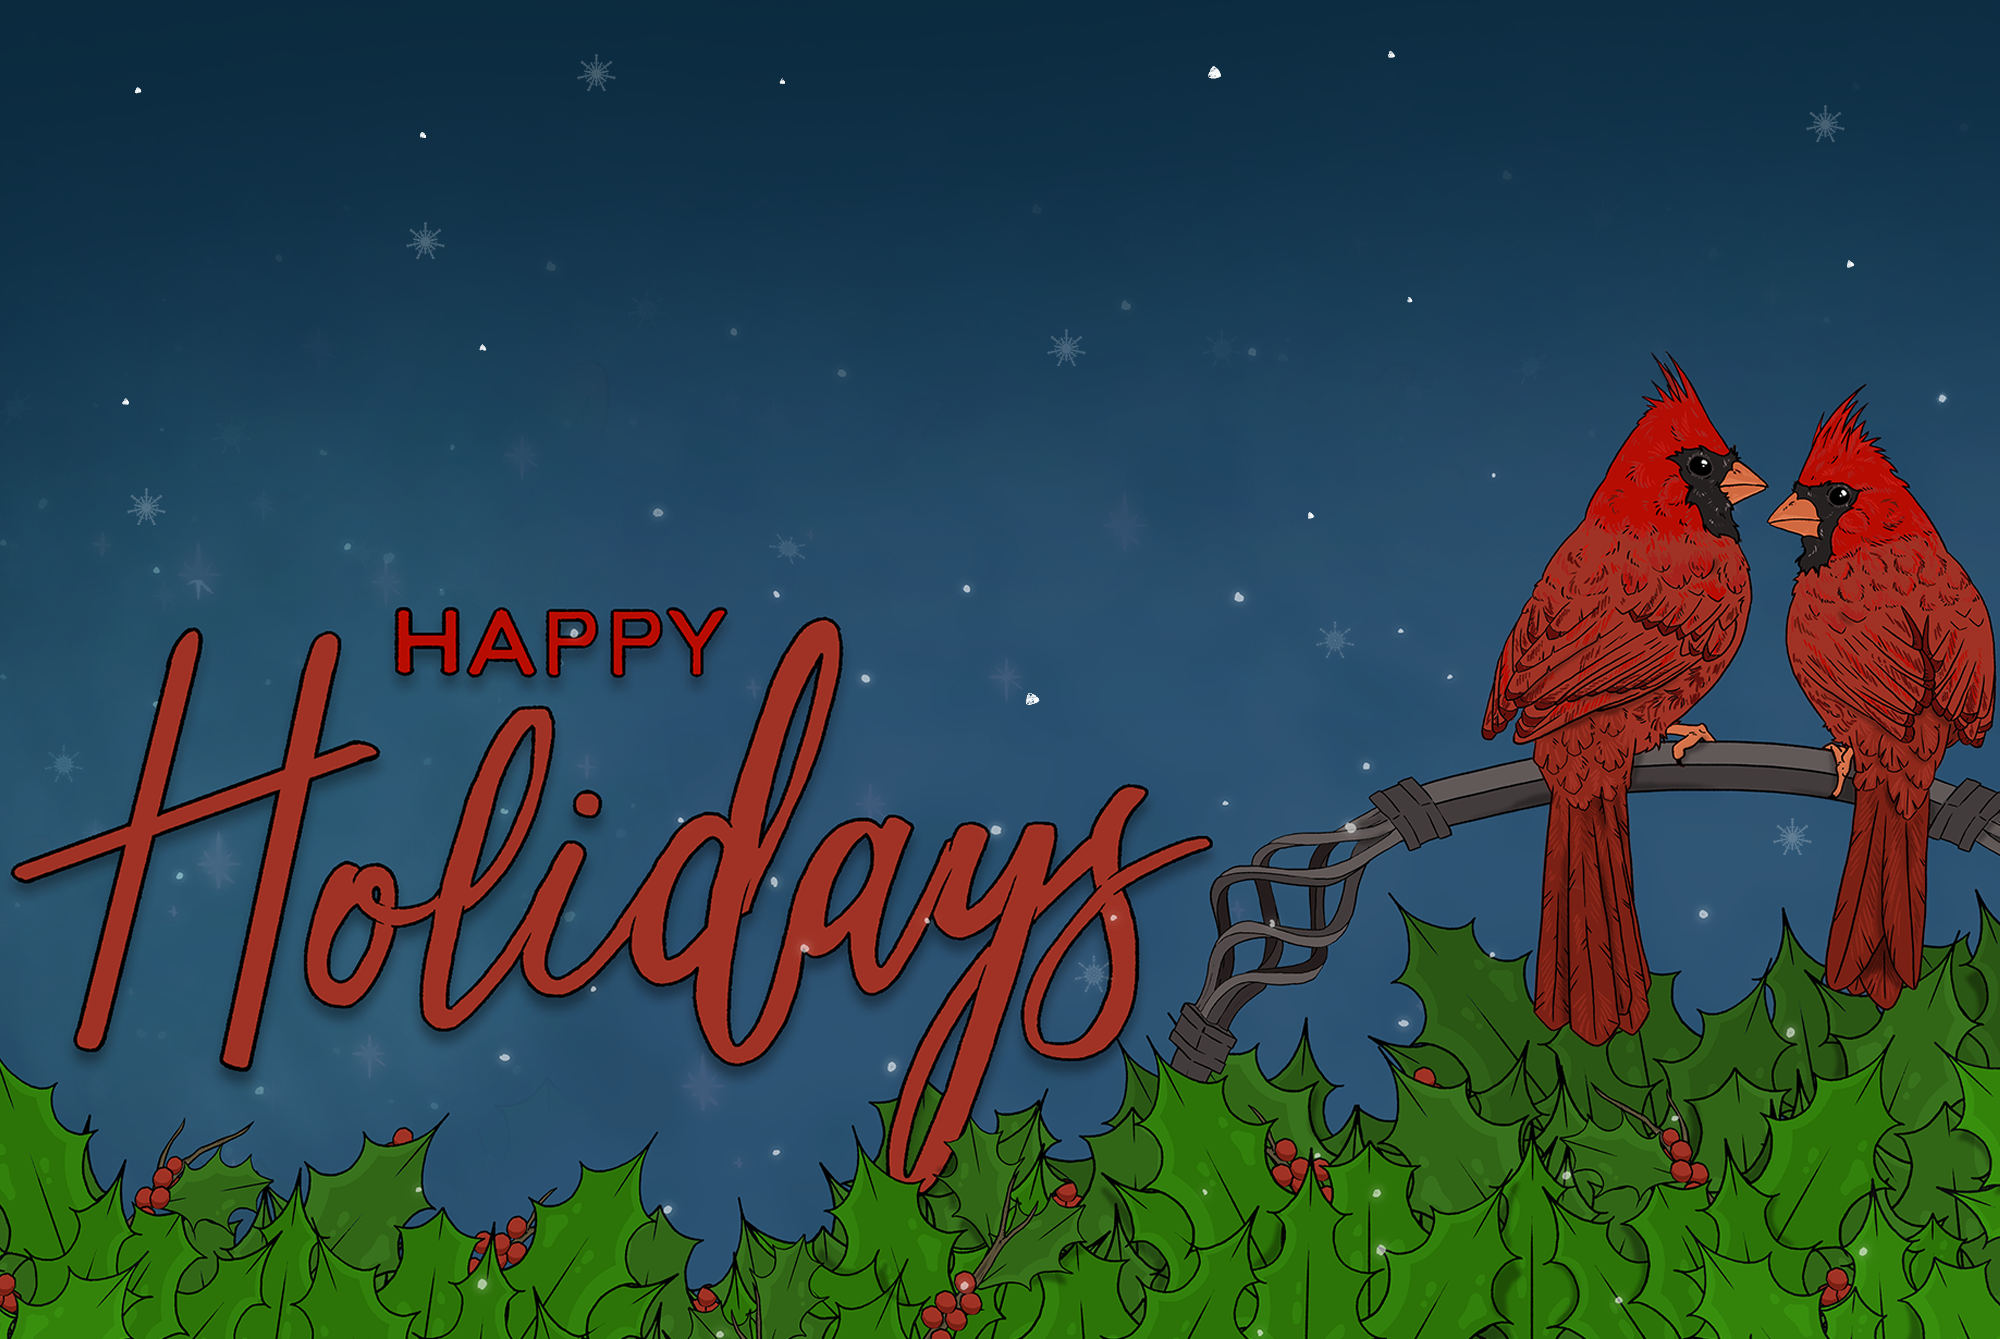 A holiday greeting Illustration of two cardinals perched on holly leaves. Illustration texts reads "Happy Hollidays"